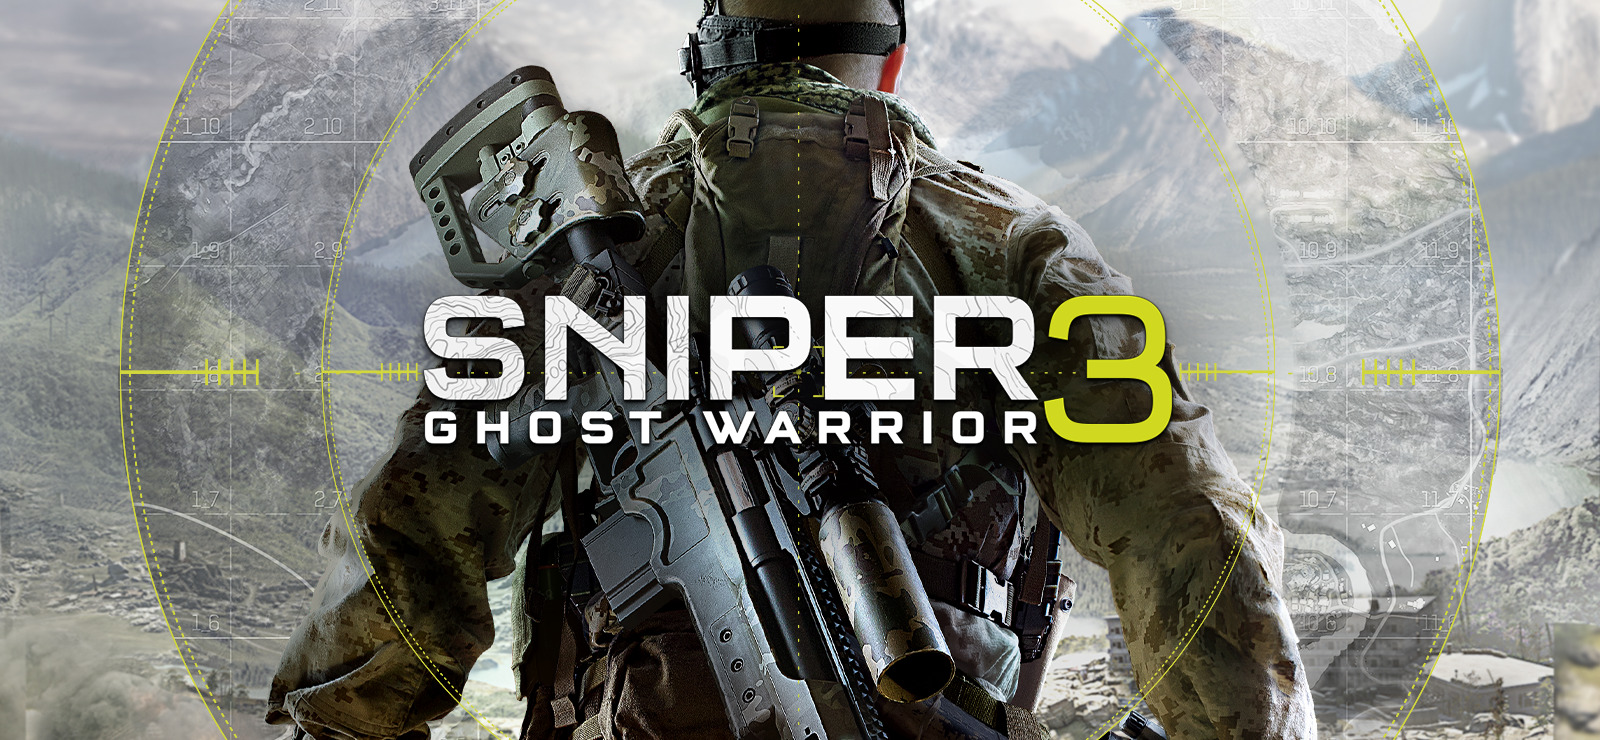 sniper ghost warrior 3 full game free